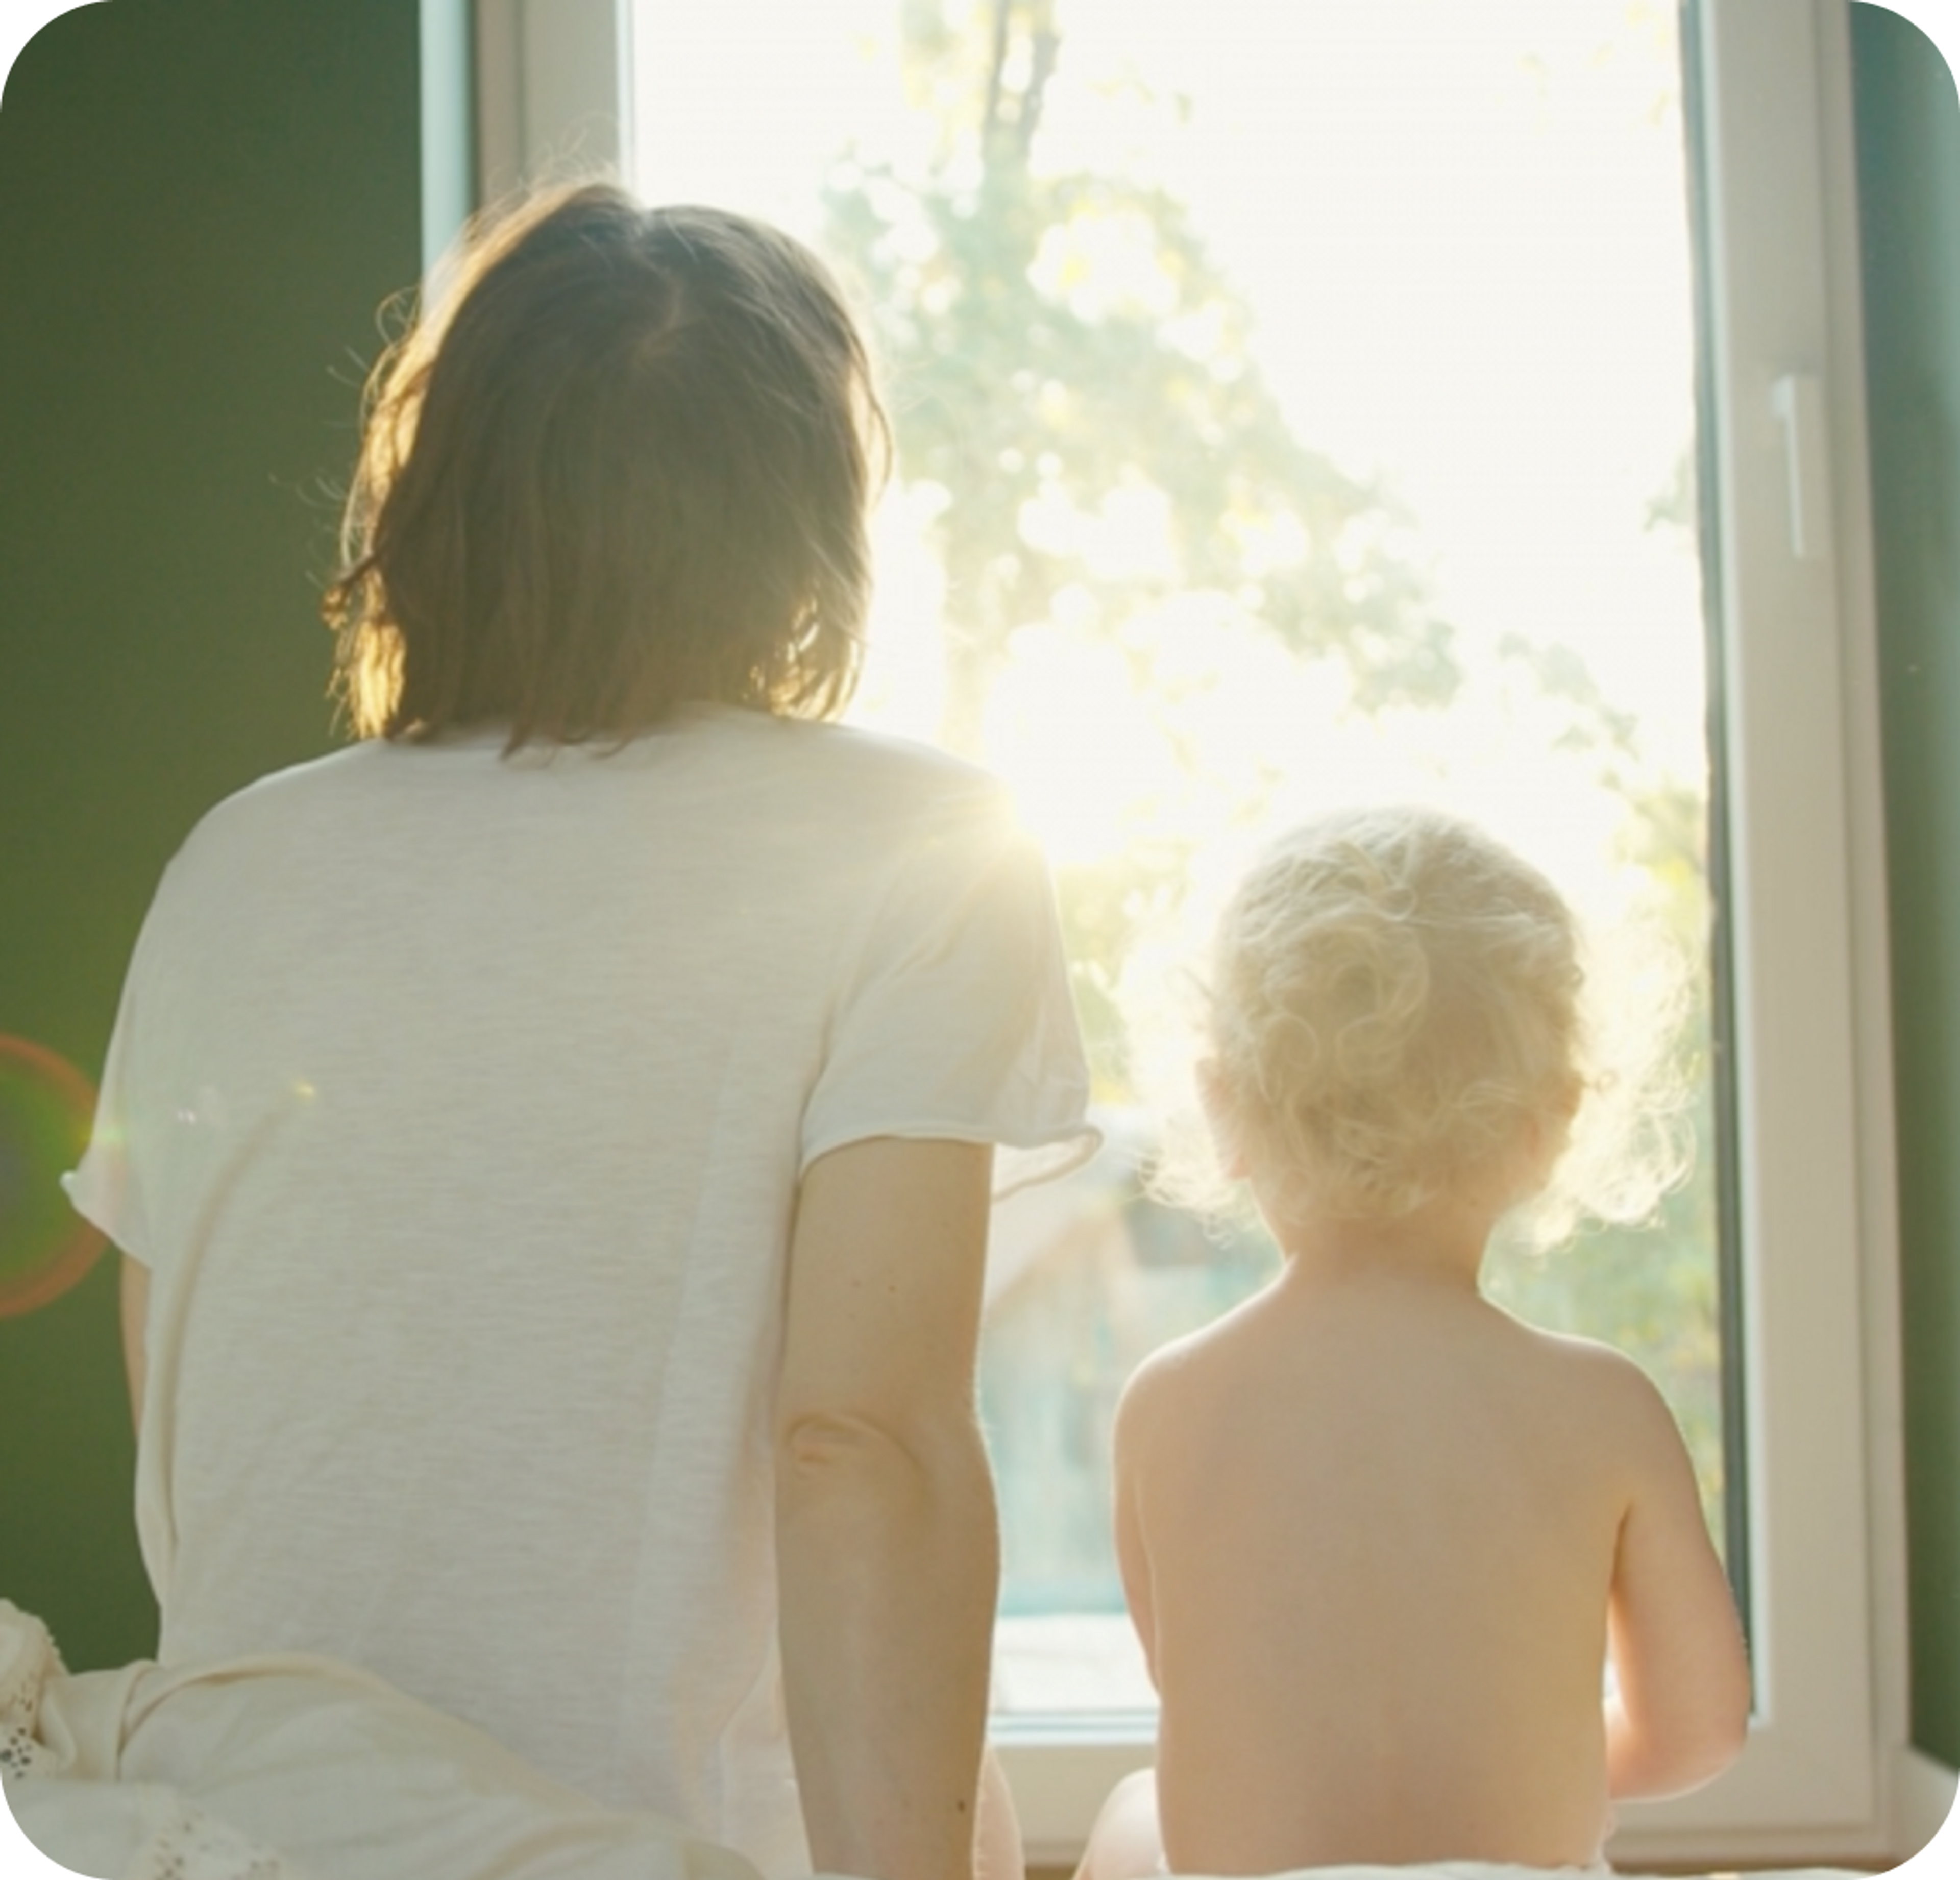 A photo of a woman and a young child looking out of a window